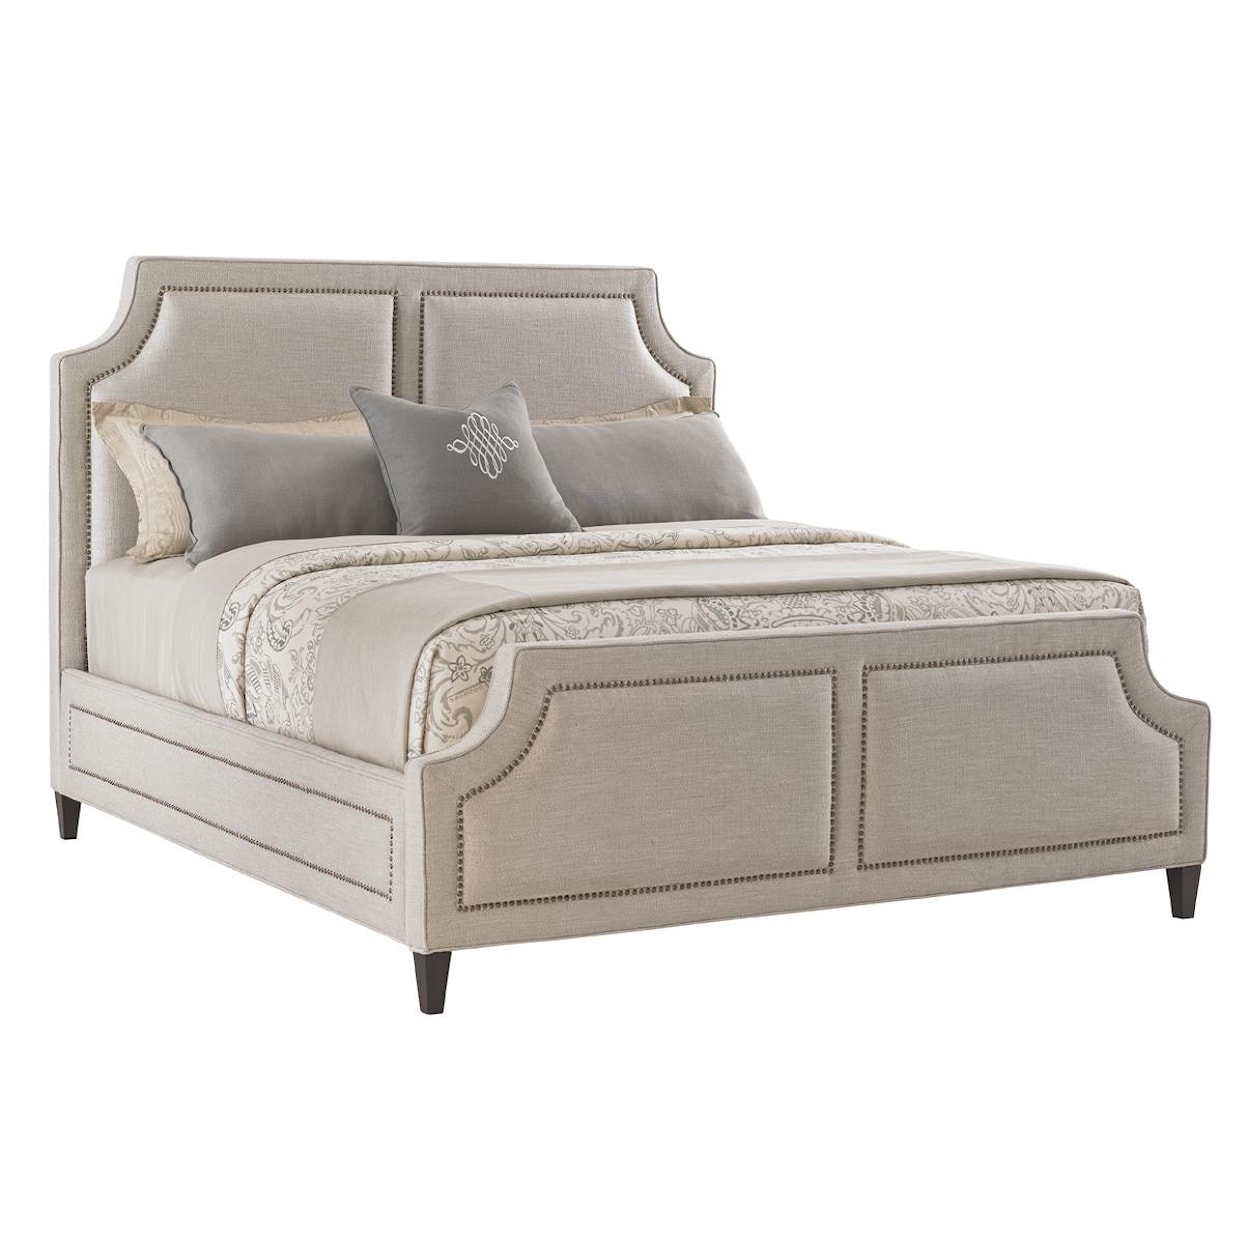 Lexington Kensington Place Queen Chadwick Upholstered Bed